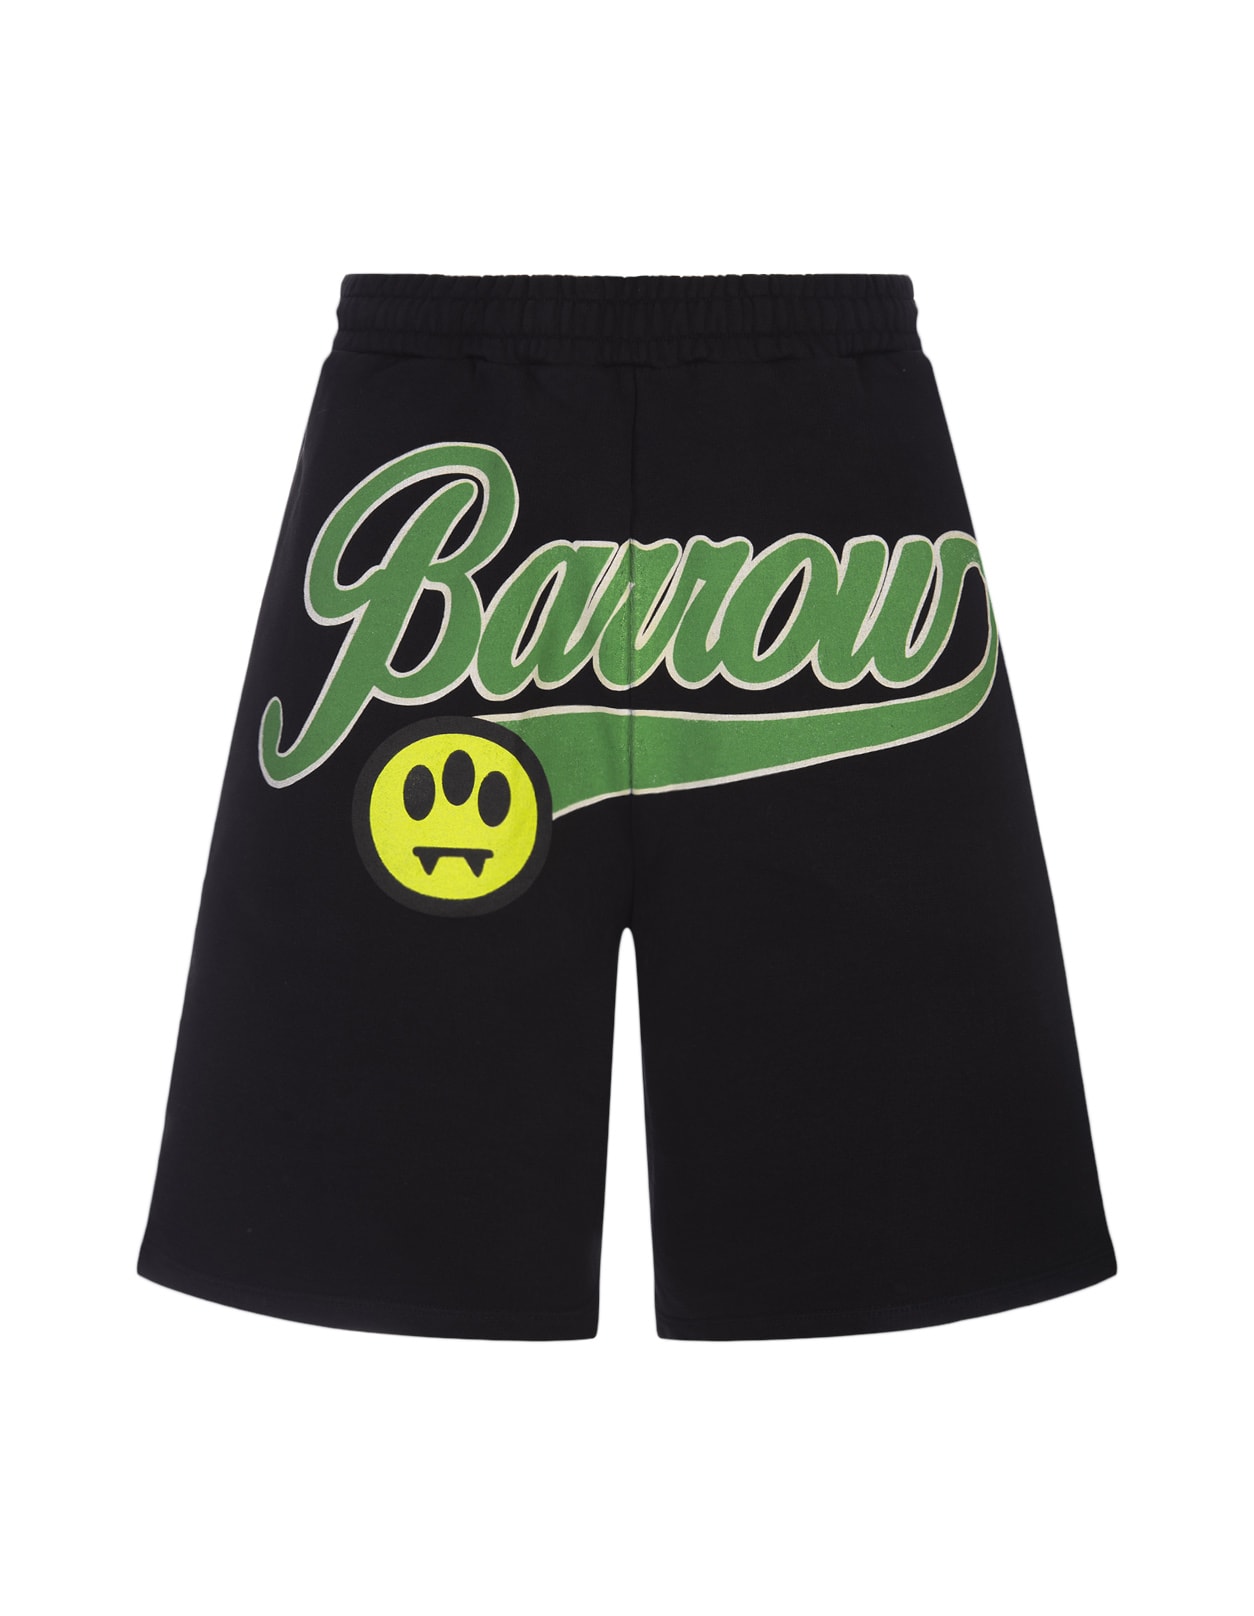 Black Bermuda Shorts With Lettering Prints.